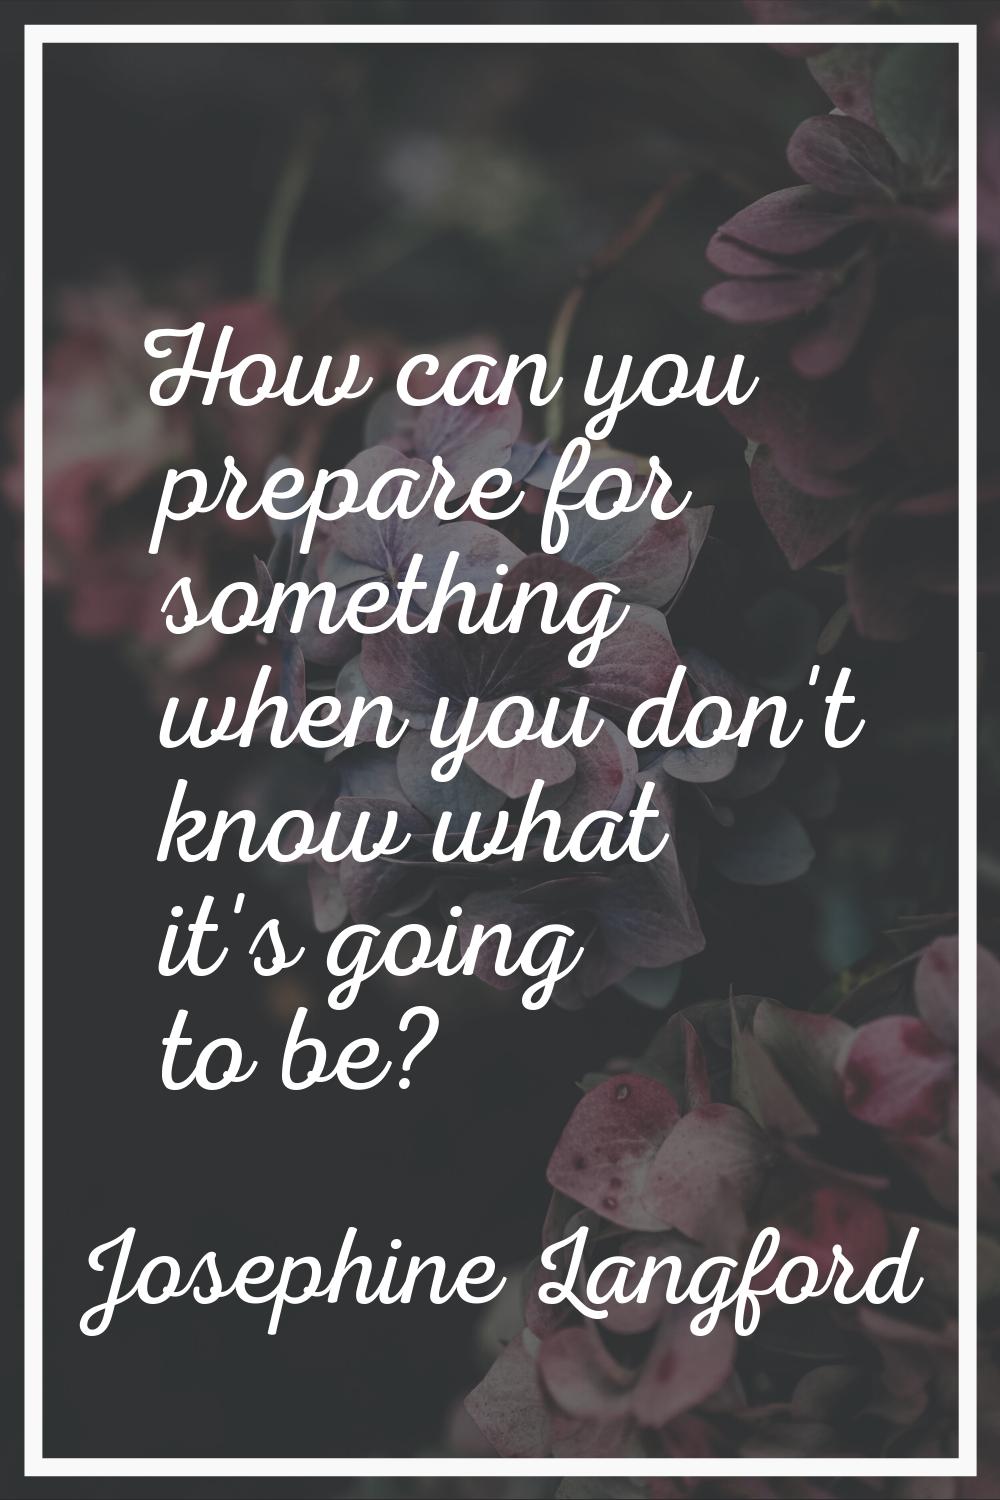 How can you prepare for something when you don't know what it's going to be?